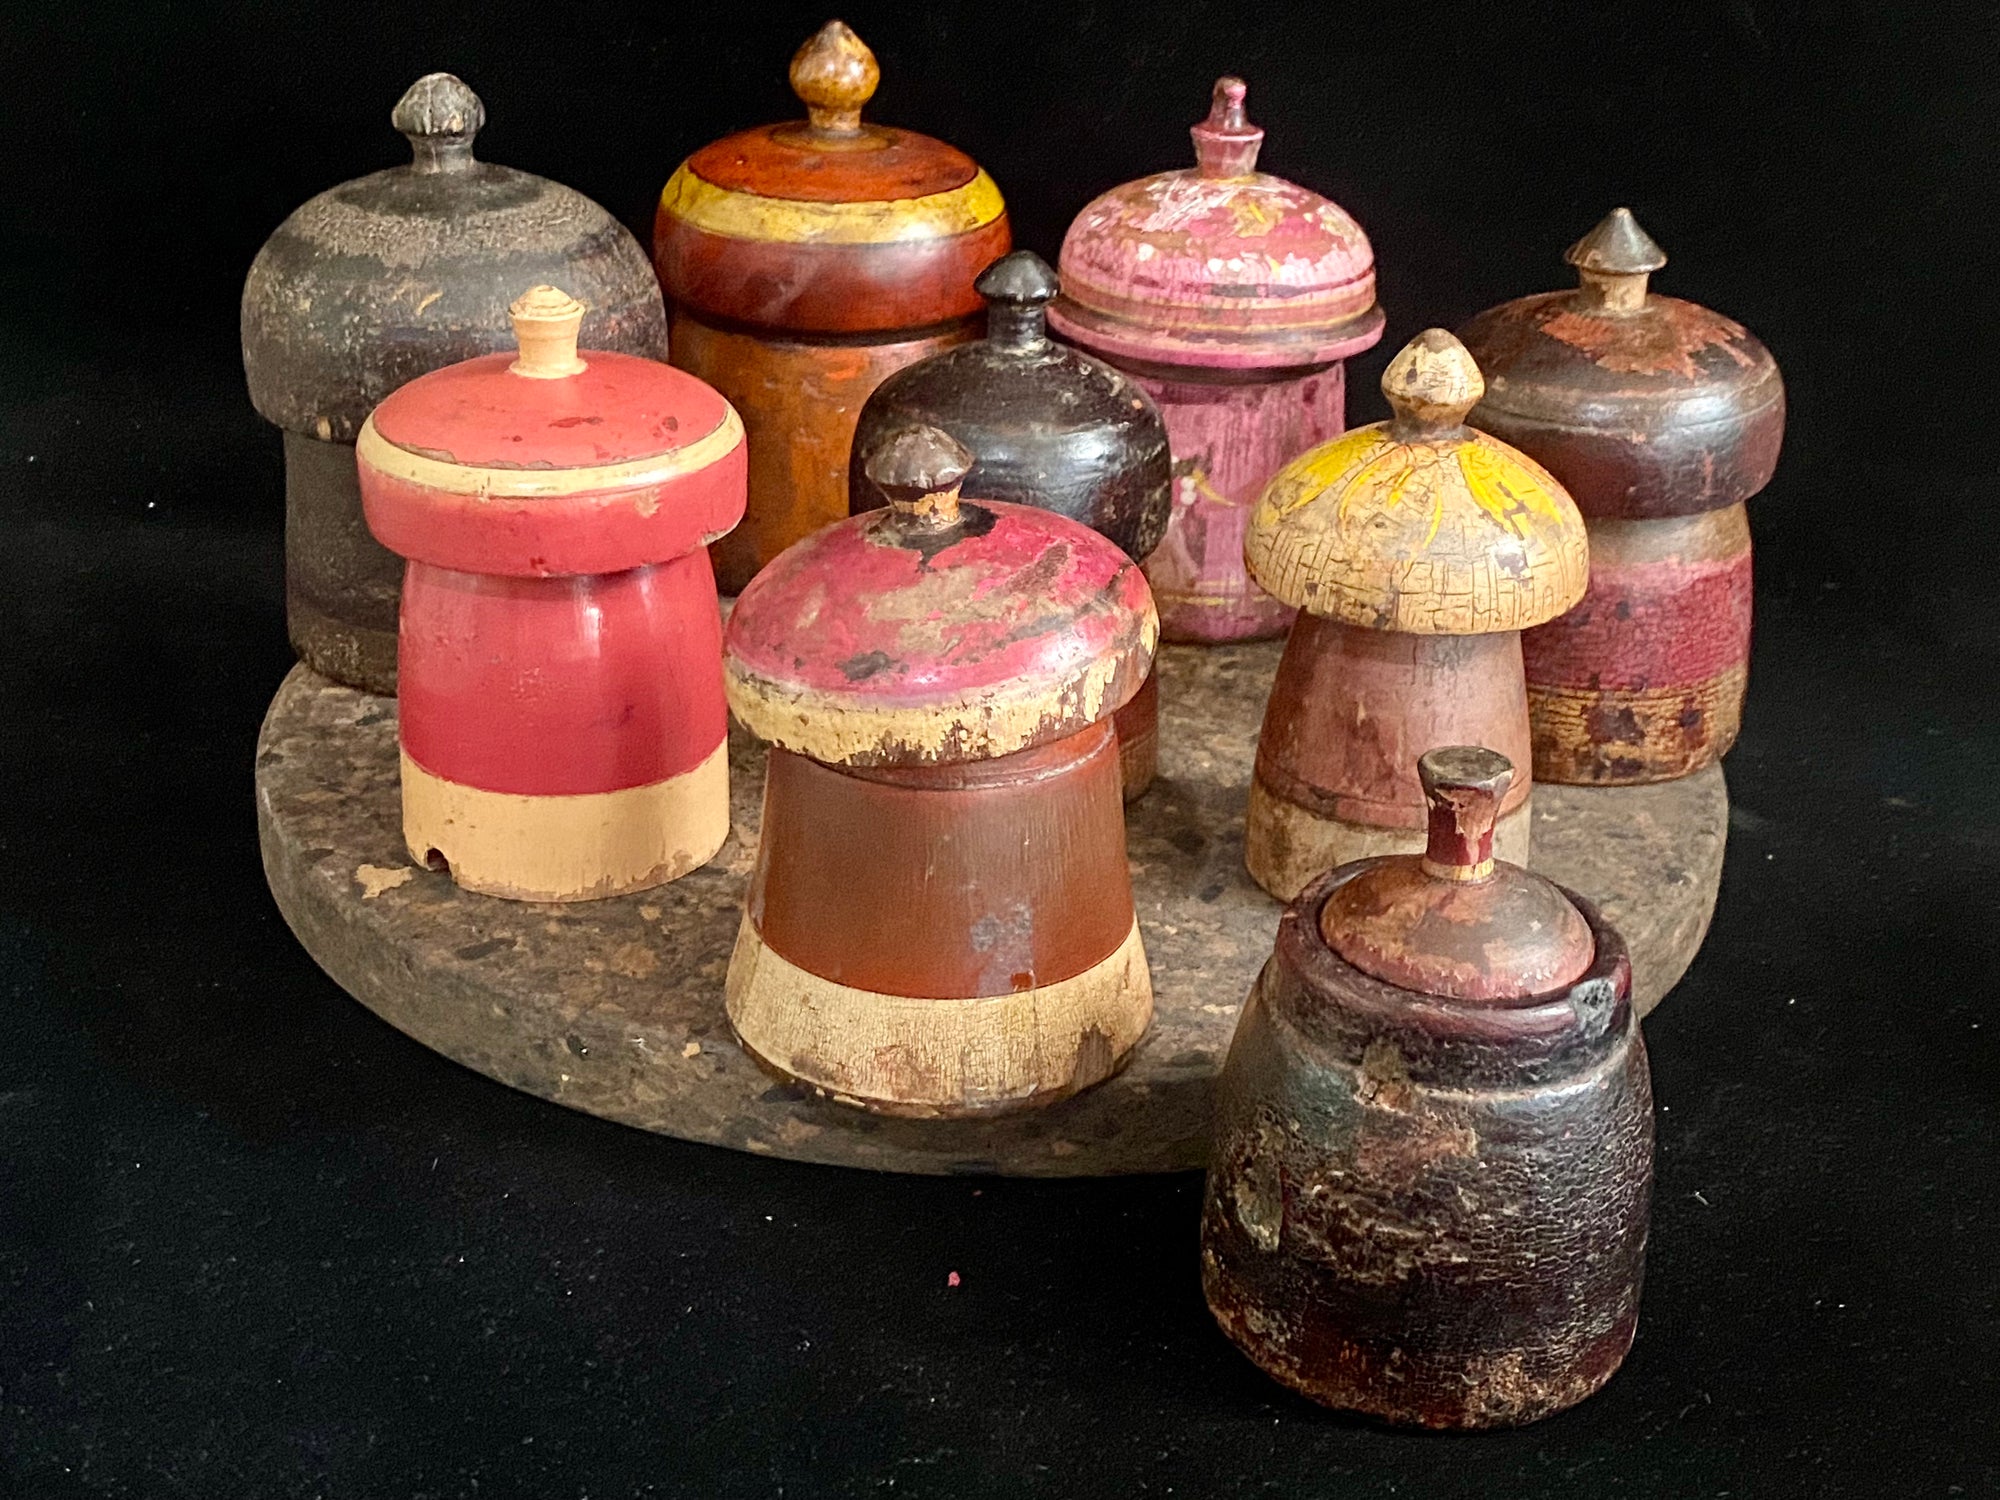 Antique small tikka pots. Hand carved teak, lacquer paint. Approx 50-90 years old. Assorted shapes, sizes and colours. Height approximately 9-12, diameter 6-8 cm